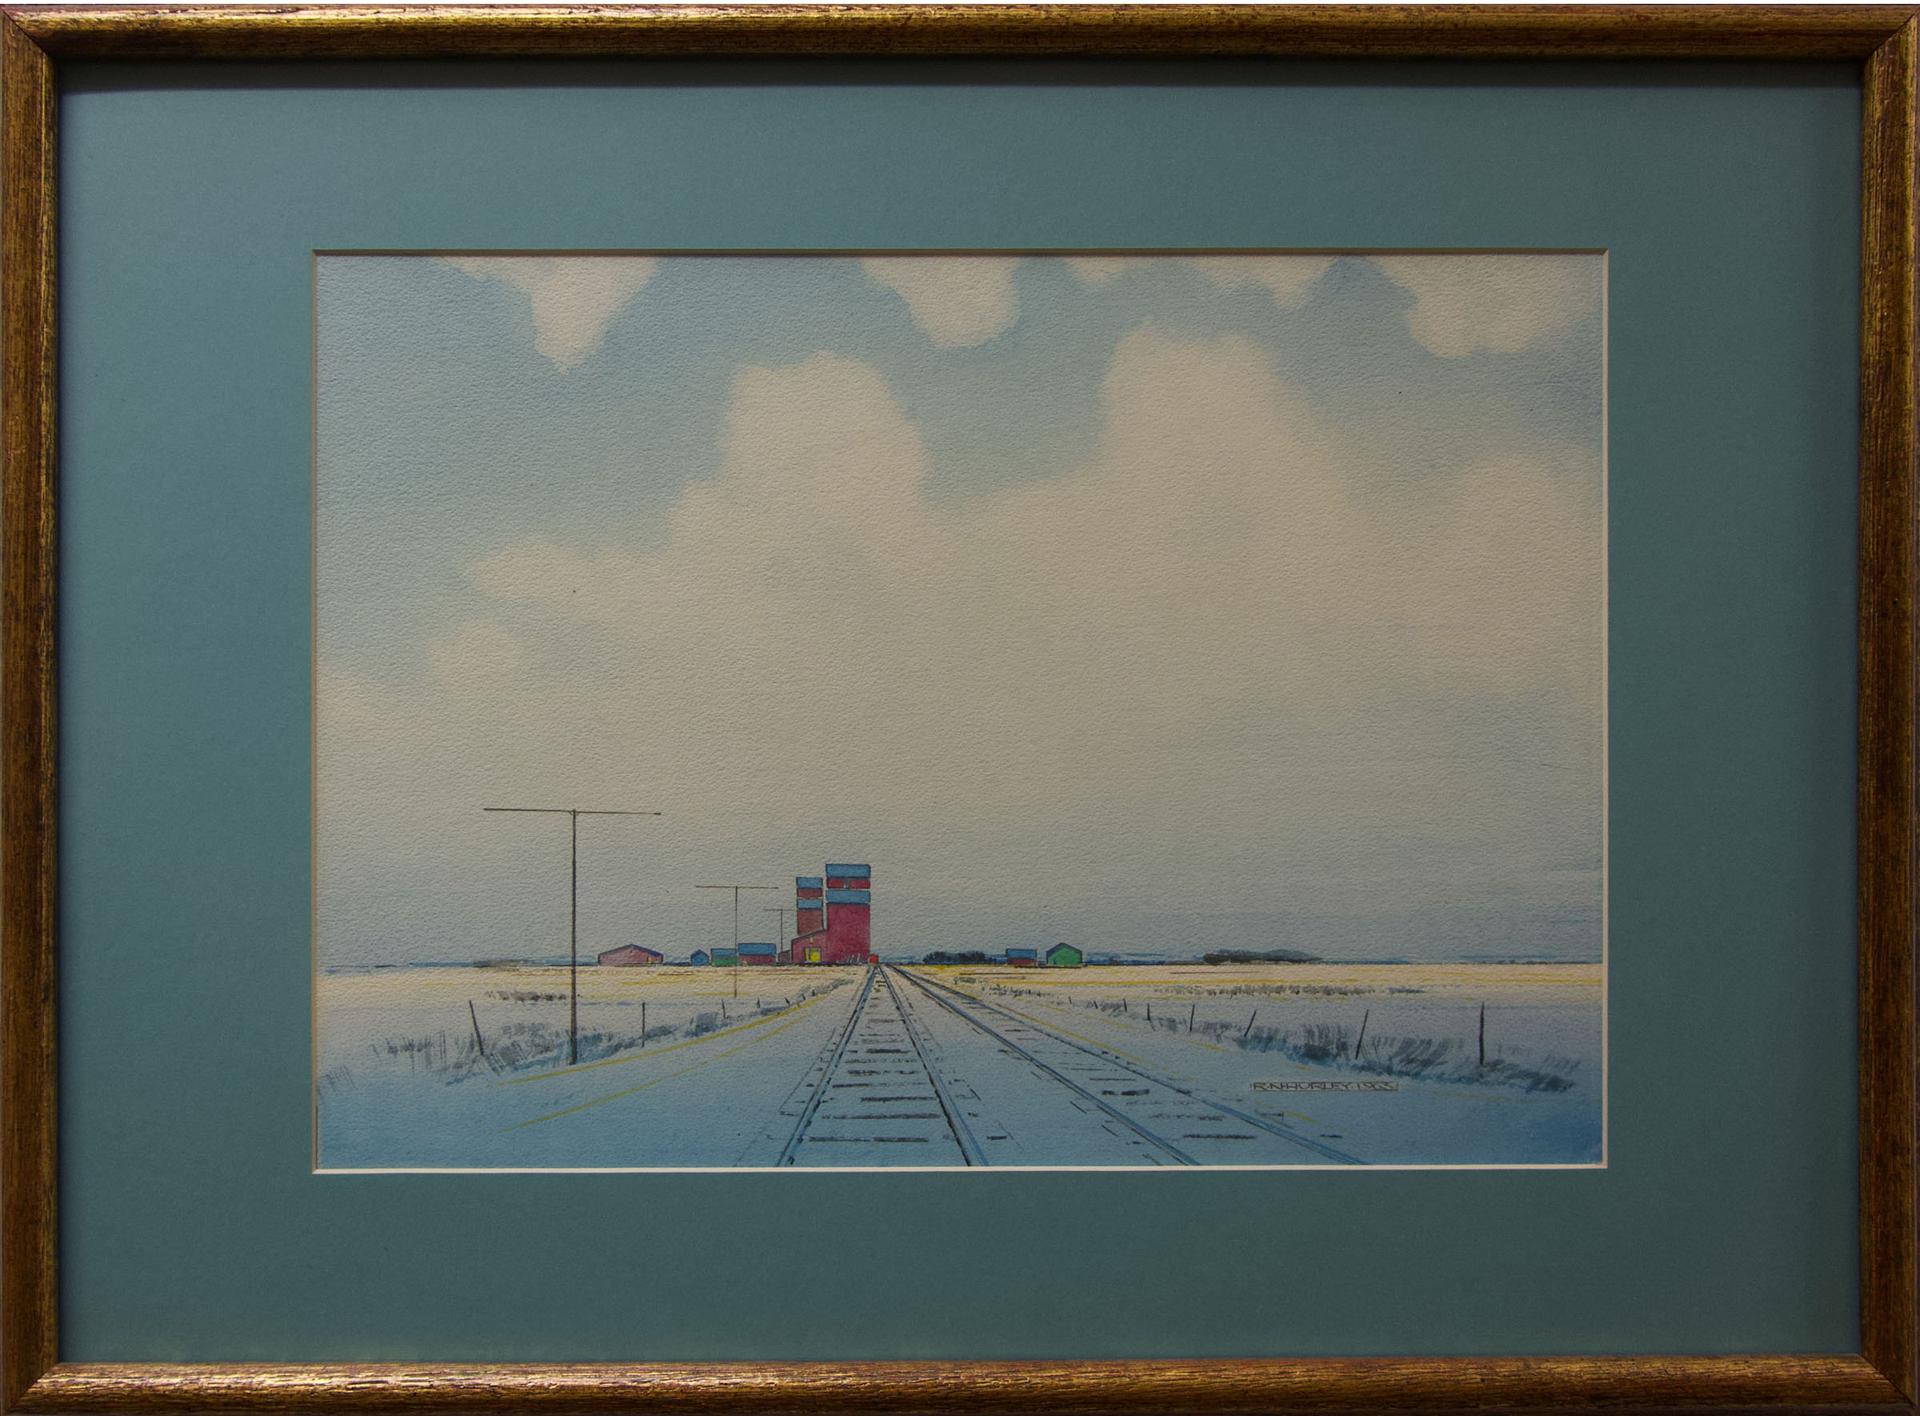 Robert Newton Hurley (1894-1980) - Untitled (Red Grain Elevators With Blue Roofs)